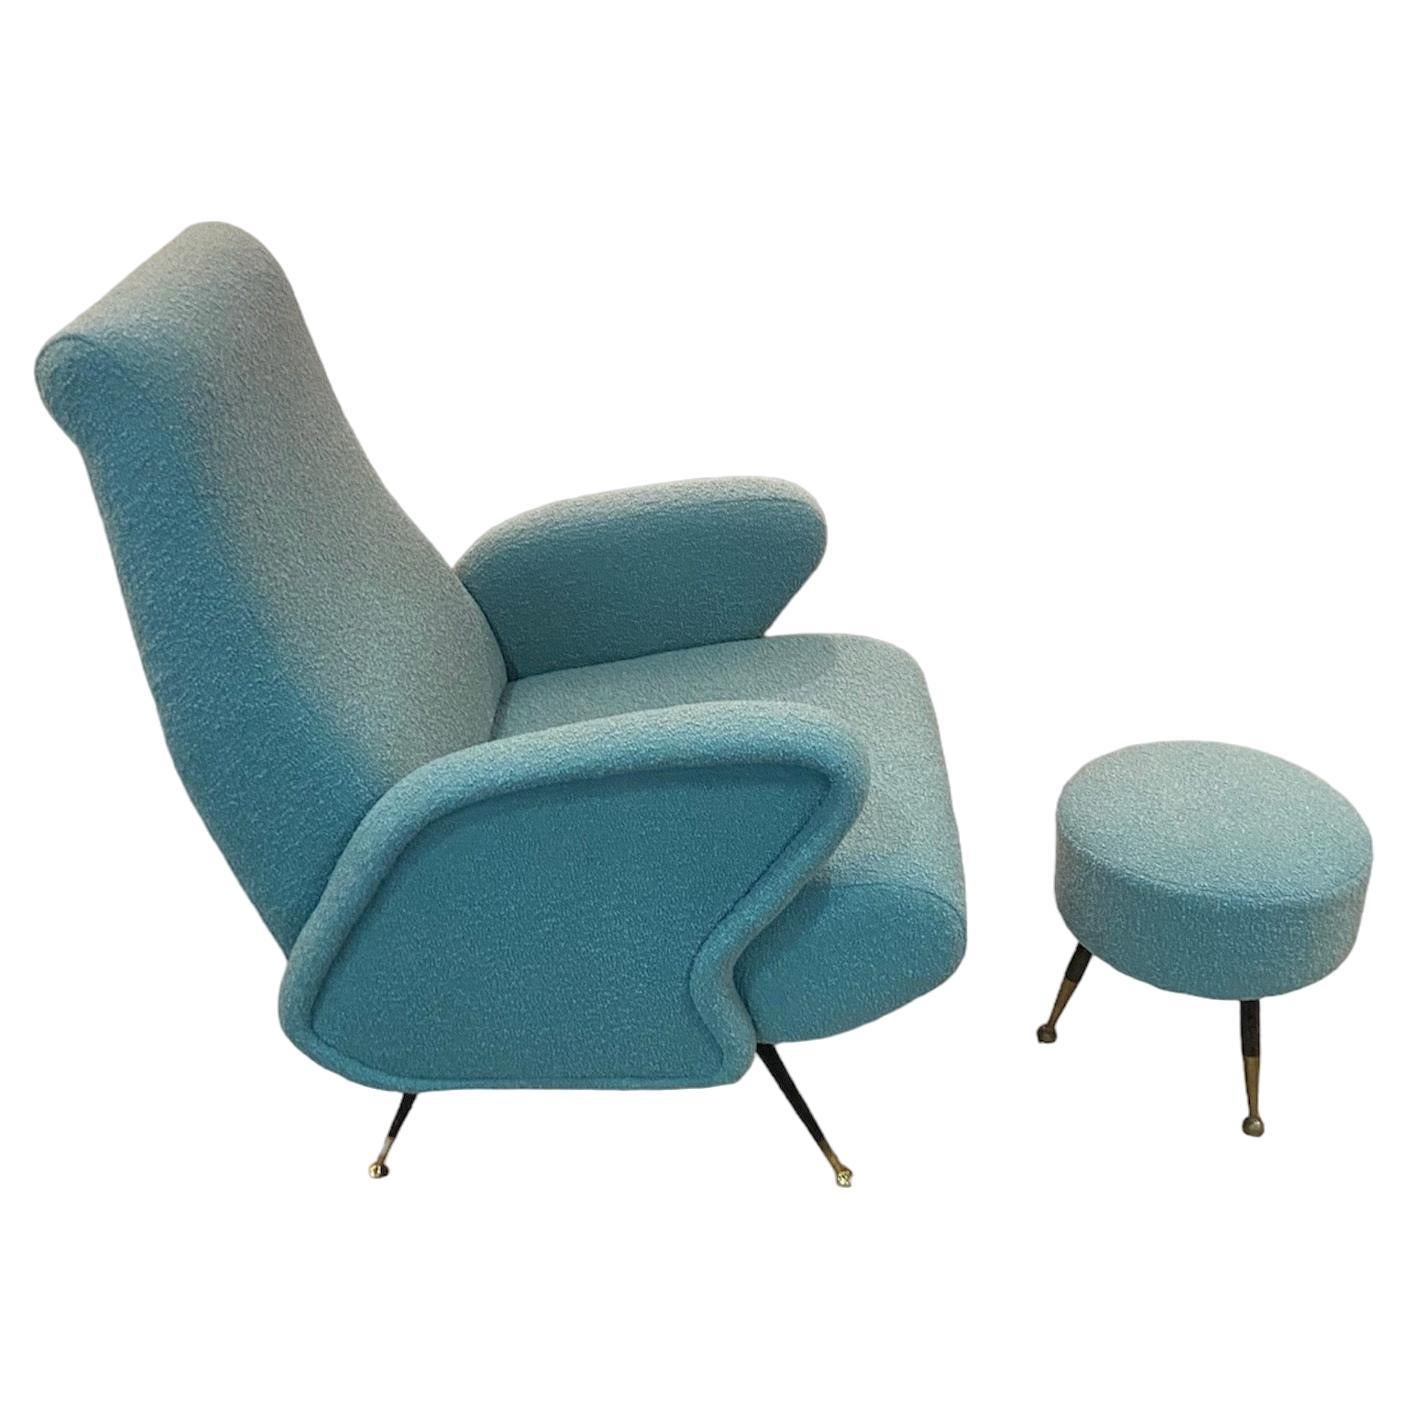 1950's Italian Armchair and matching stool